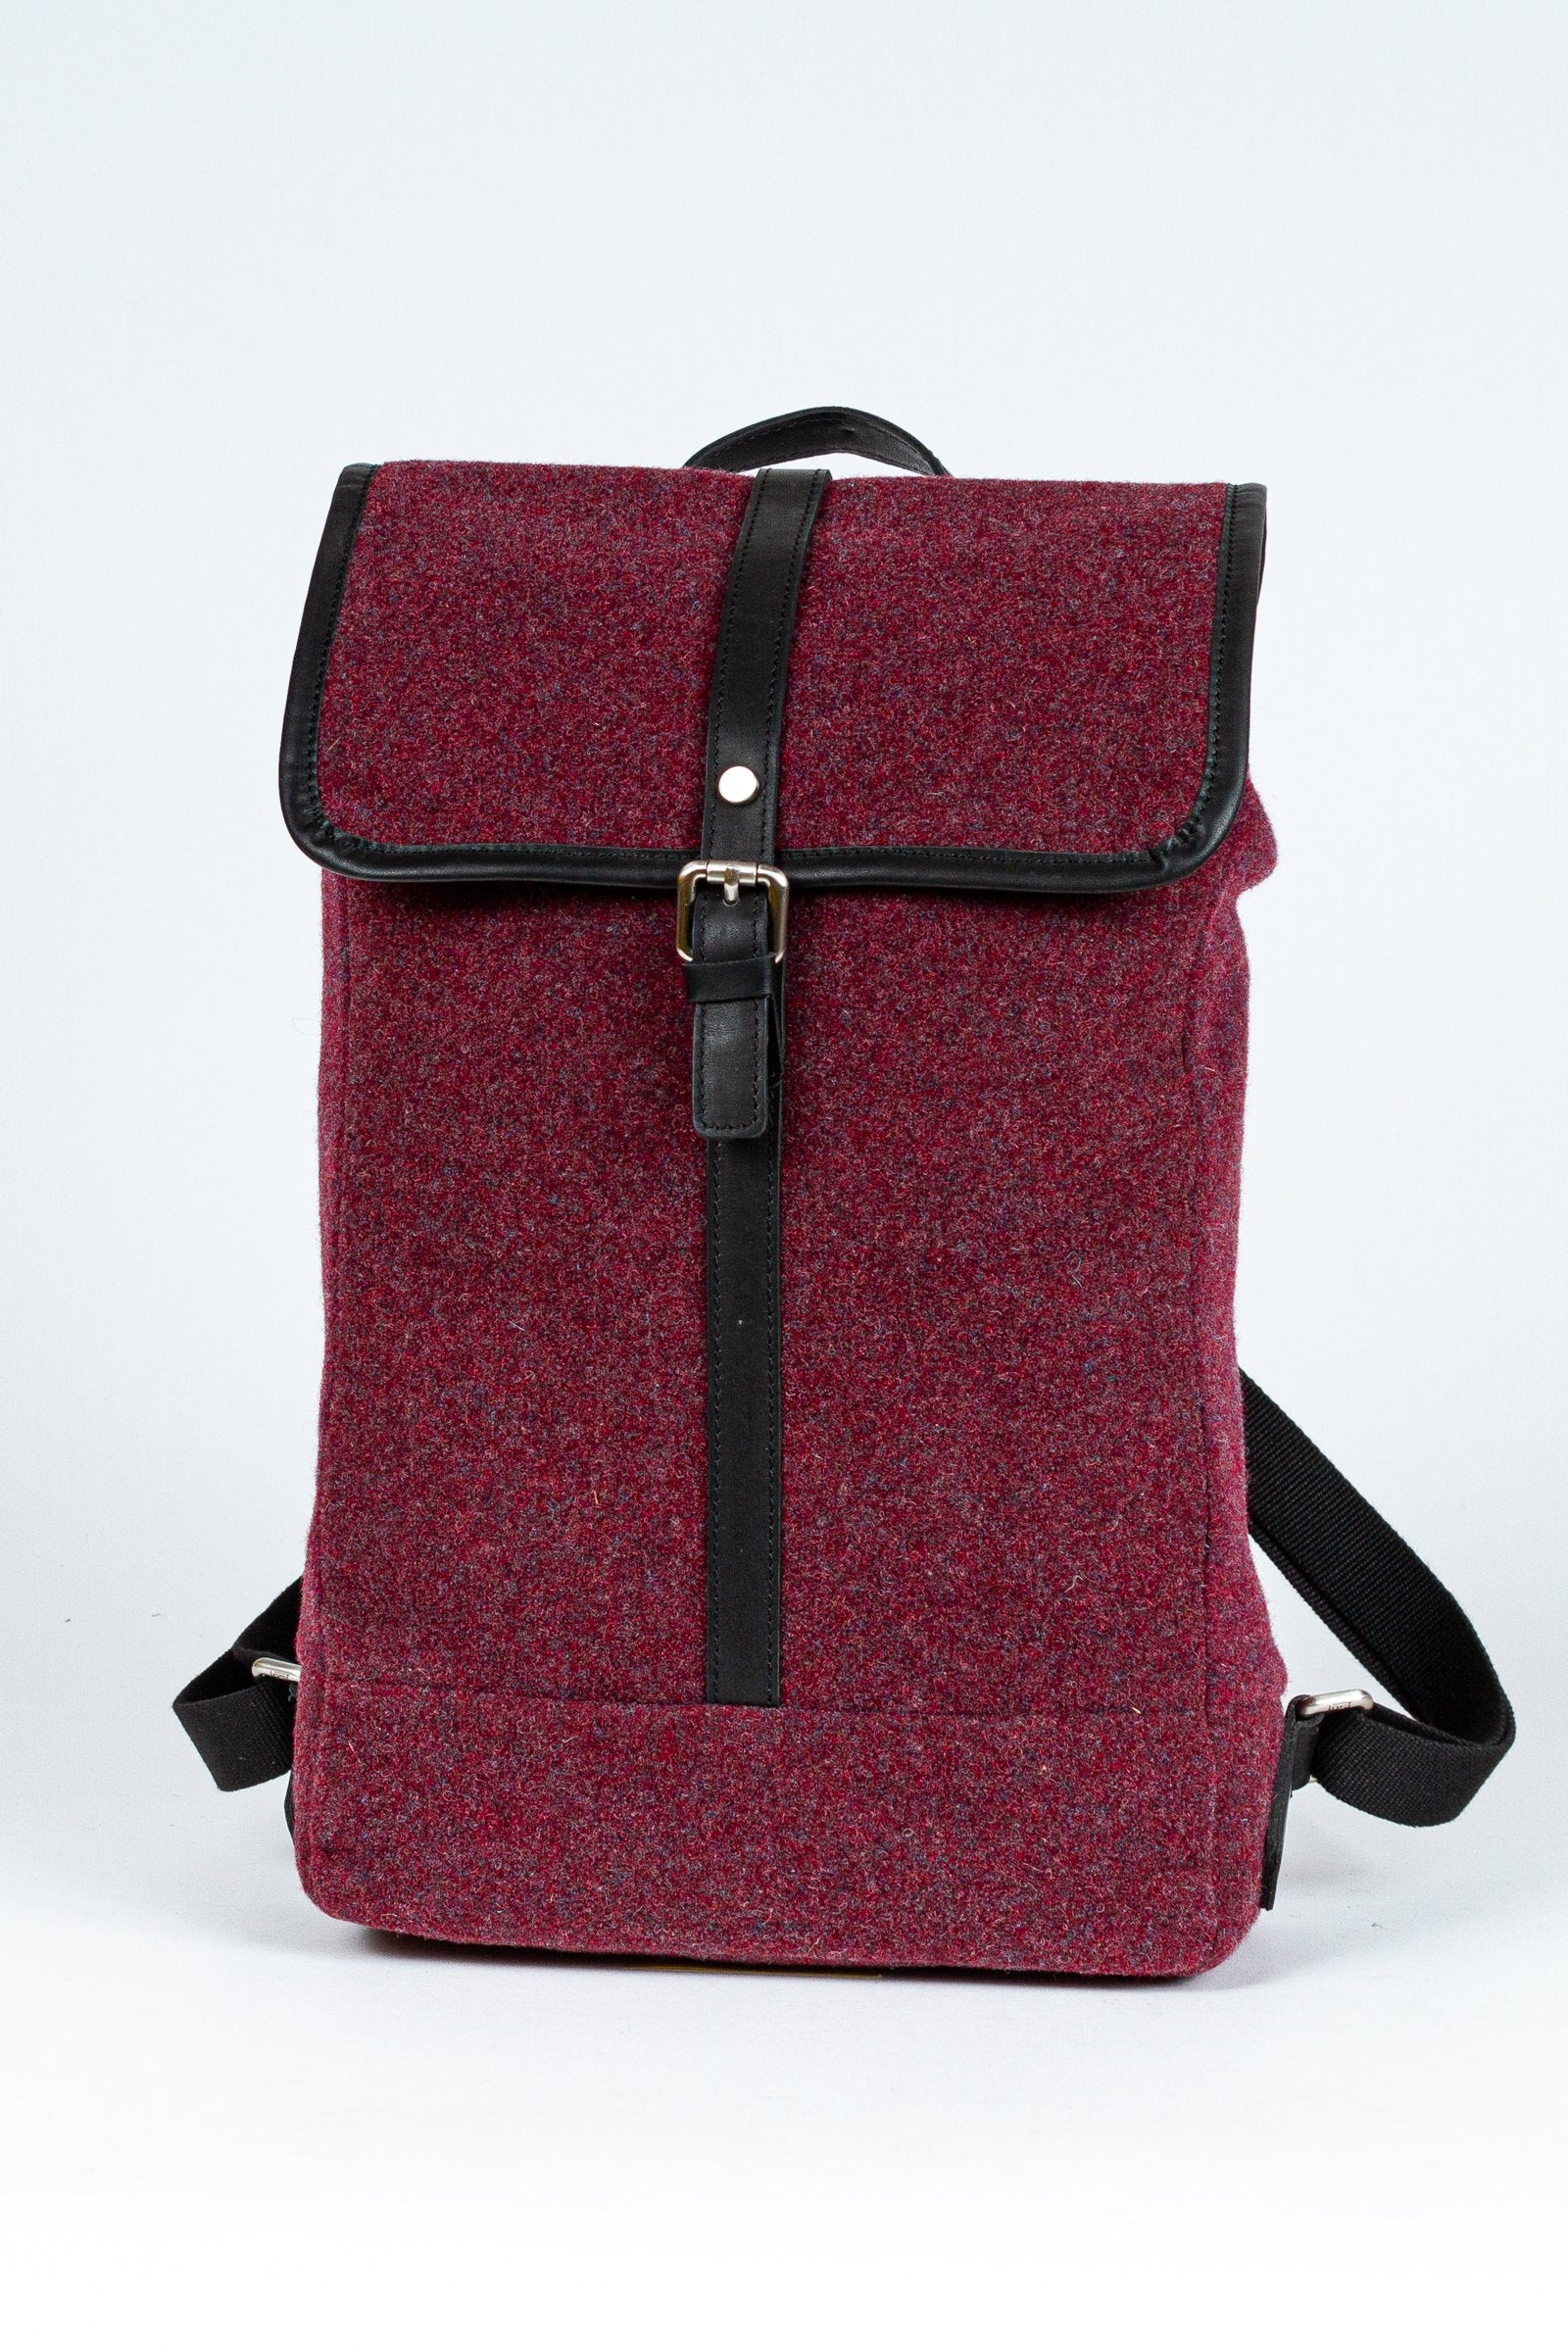 BEON.COM.AU The Jost Farum Fold Top Backback is a felt bag made in Europe from premium European leathers and fabrics. Made of wool felt Genuine leather trims Bags Jost at BEON.COM.AU